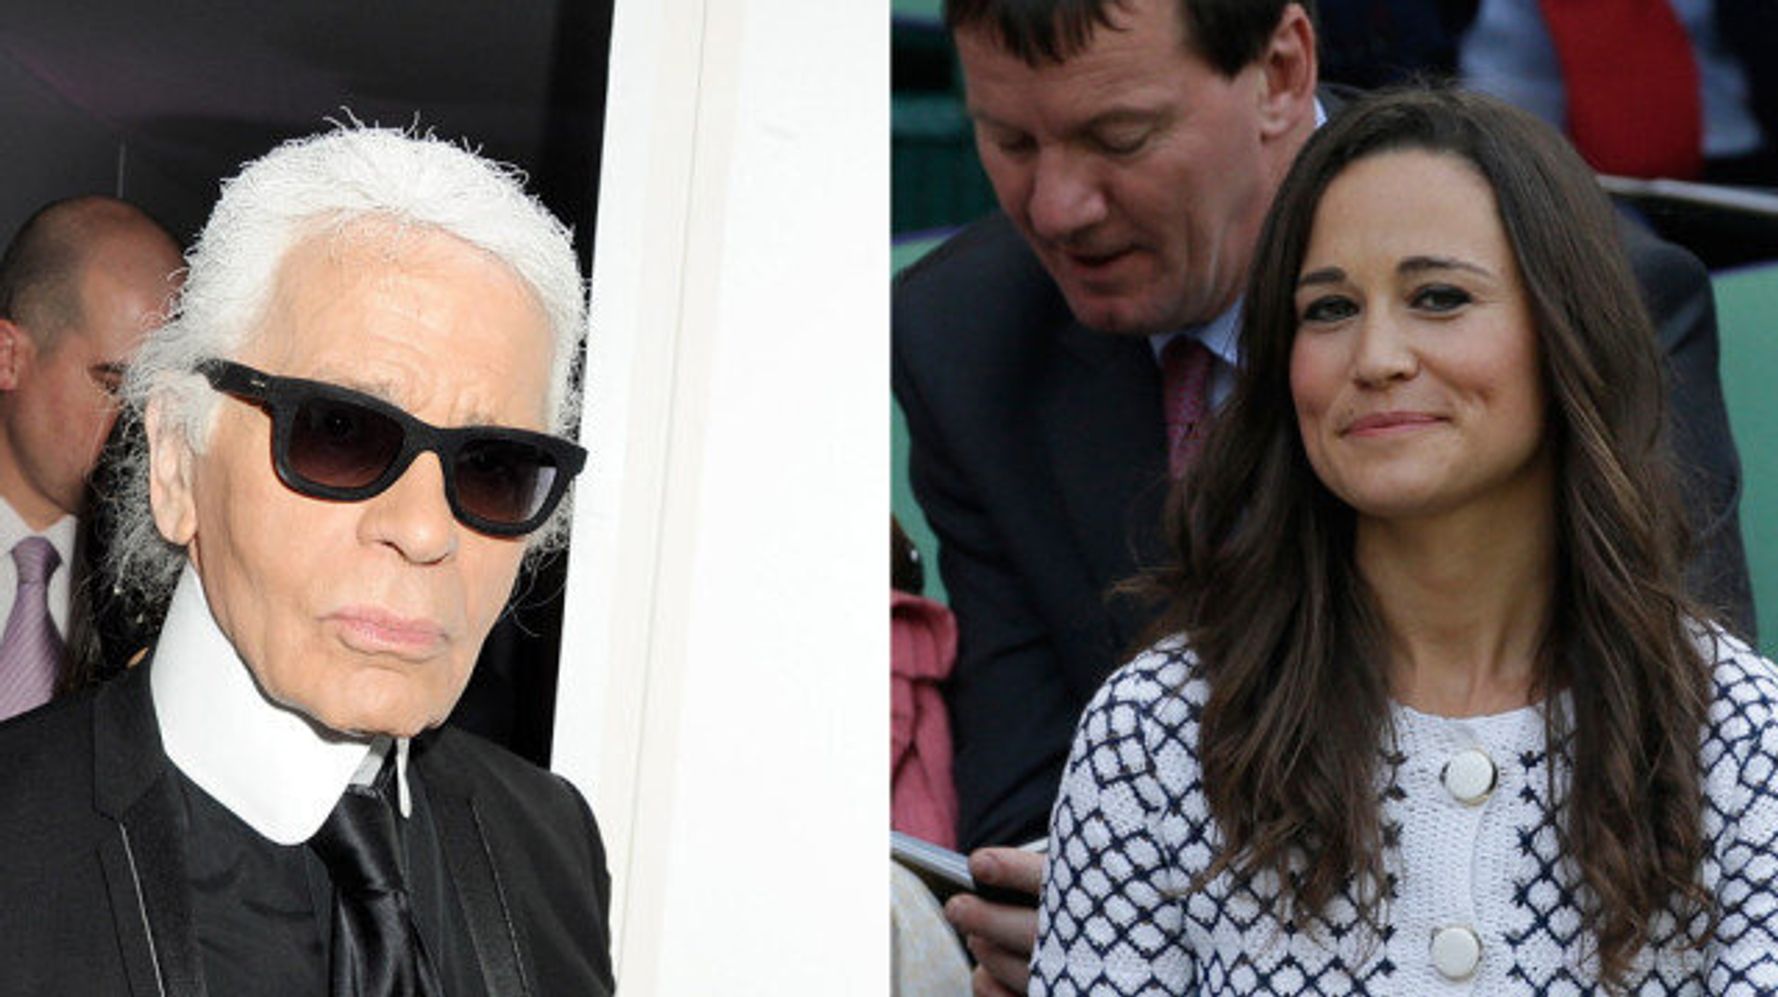 Karl Lagerfeld To Pippa Middleton: 'She Should Only Show Her Back